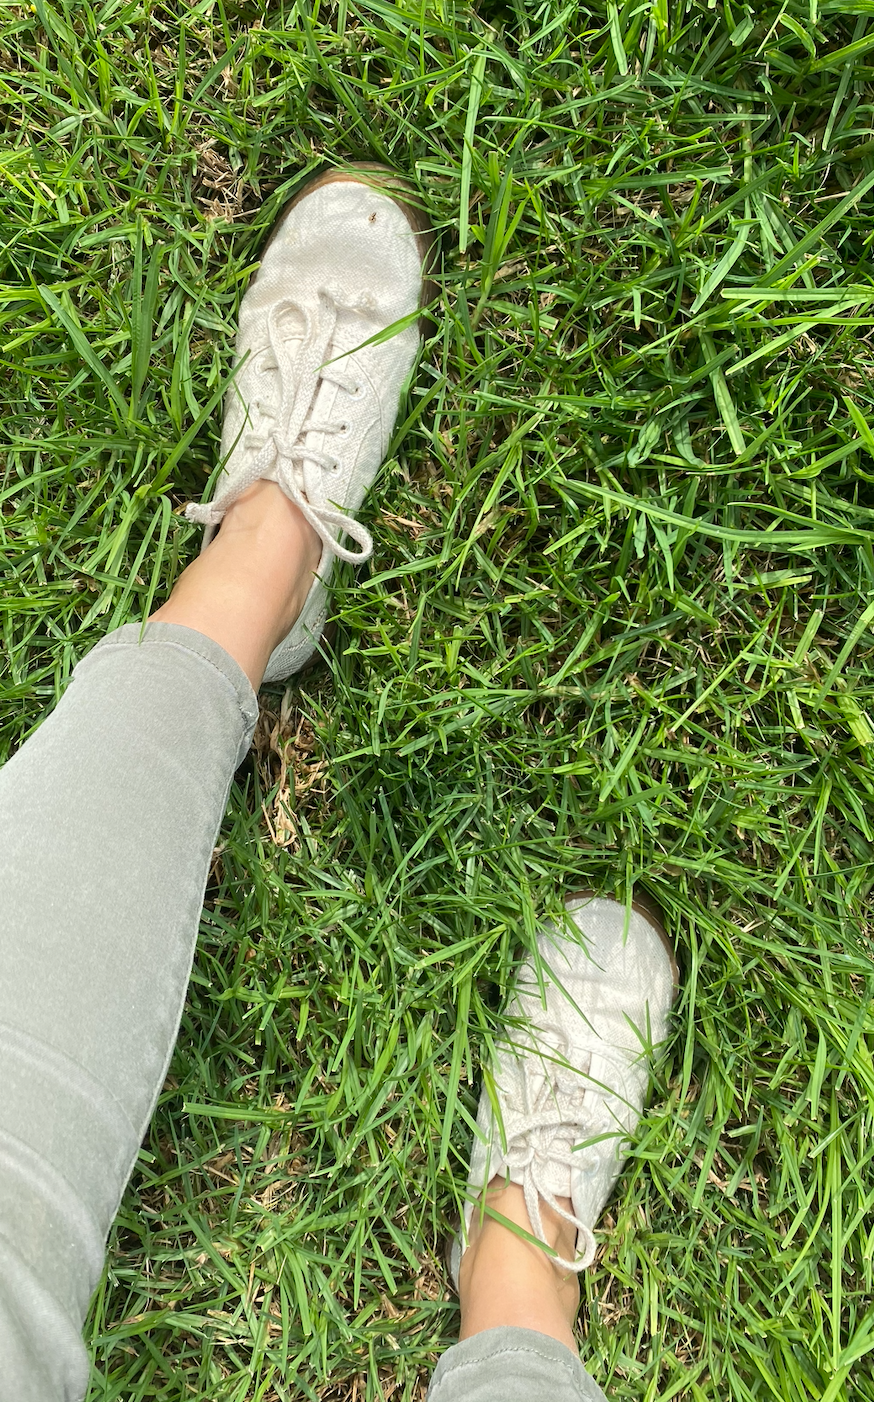 Krista&#x27;s shoes in the grass